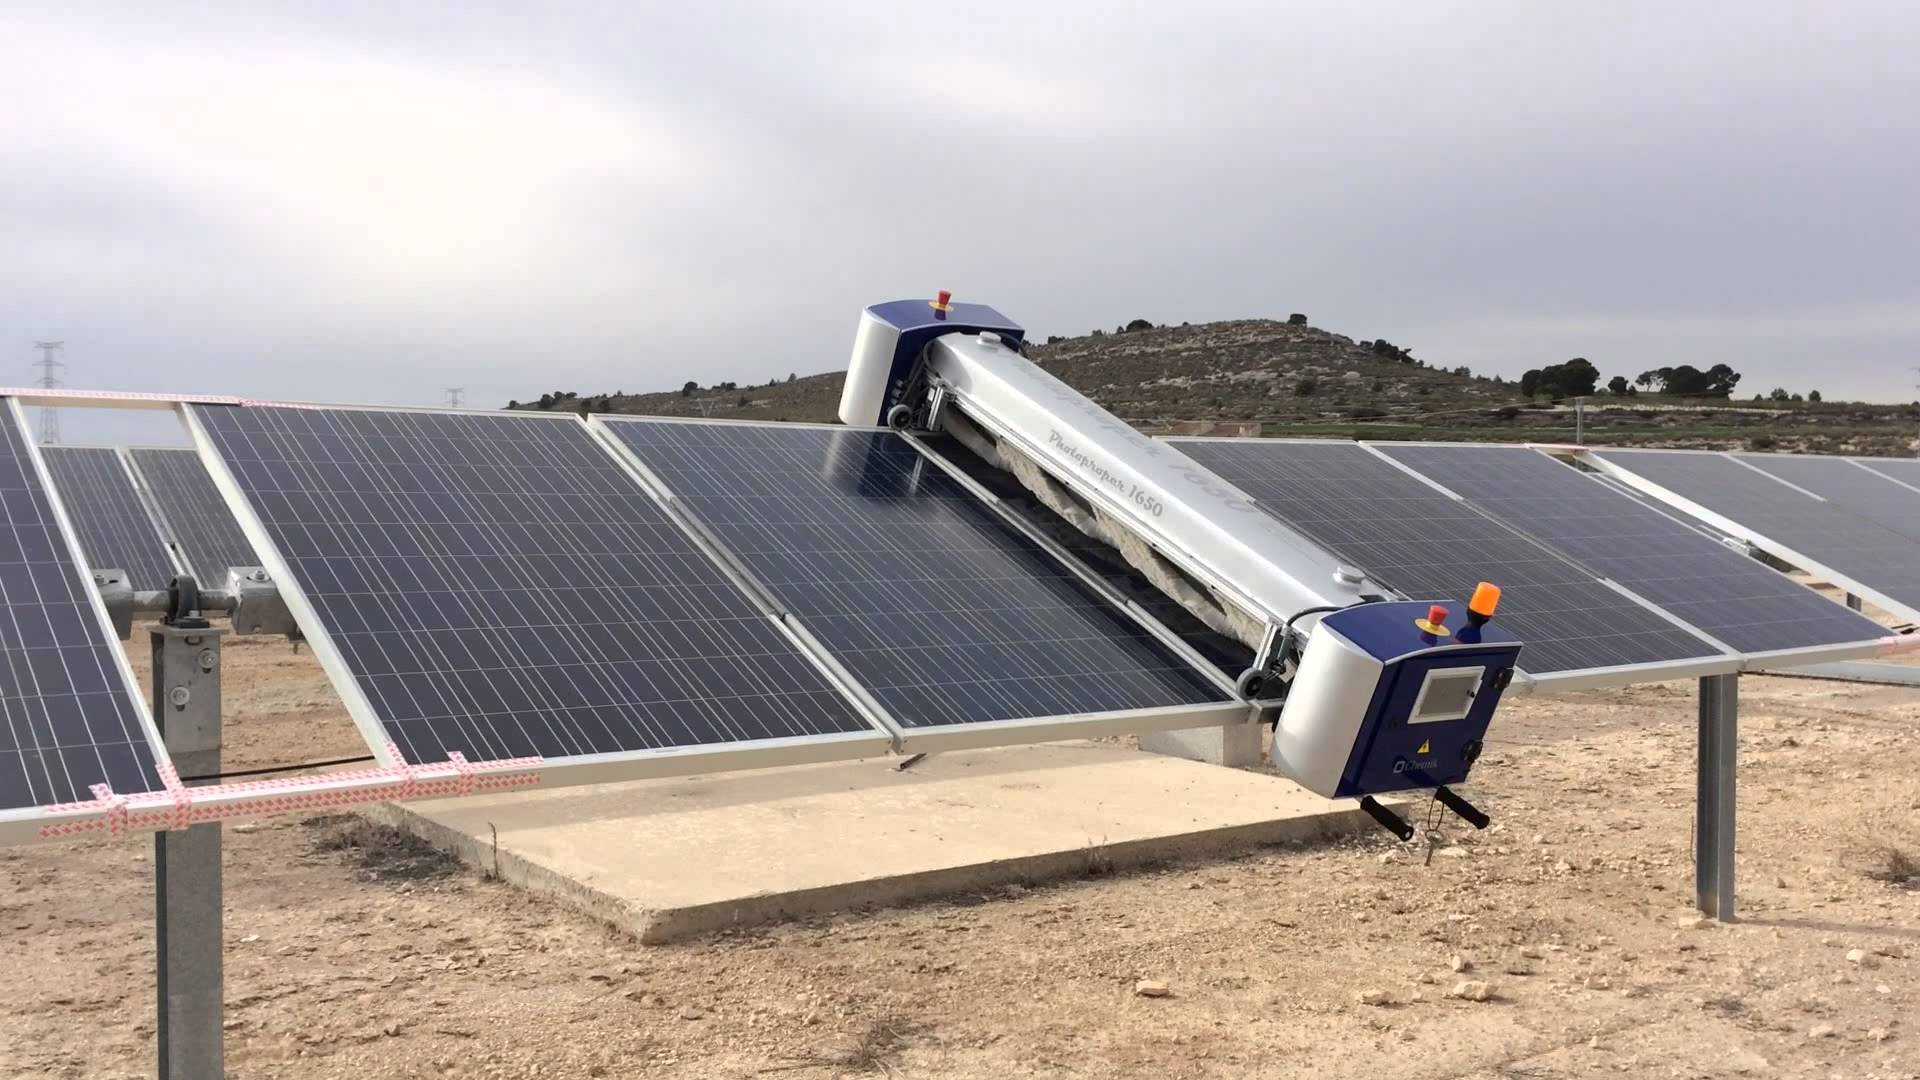 Fully Automated Robotic Cleaning Makes Solar Panels More Efficient